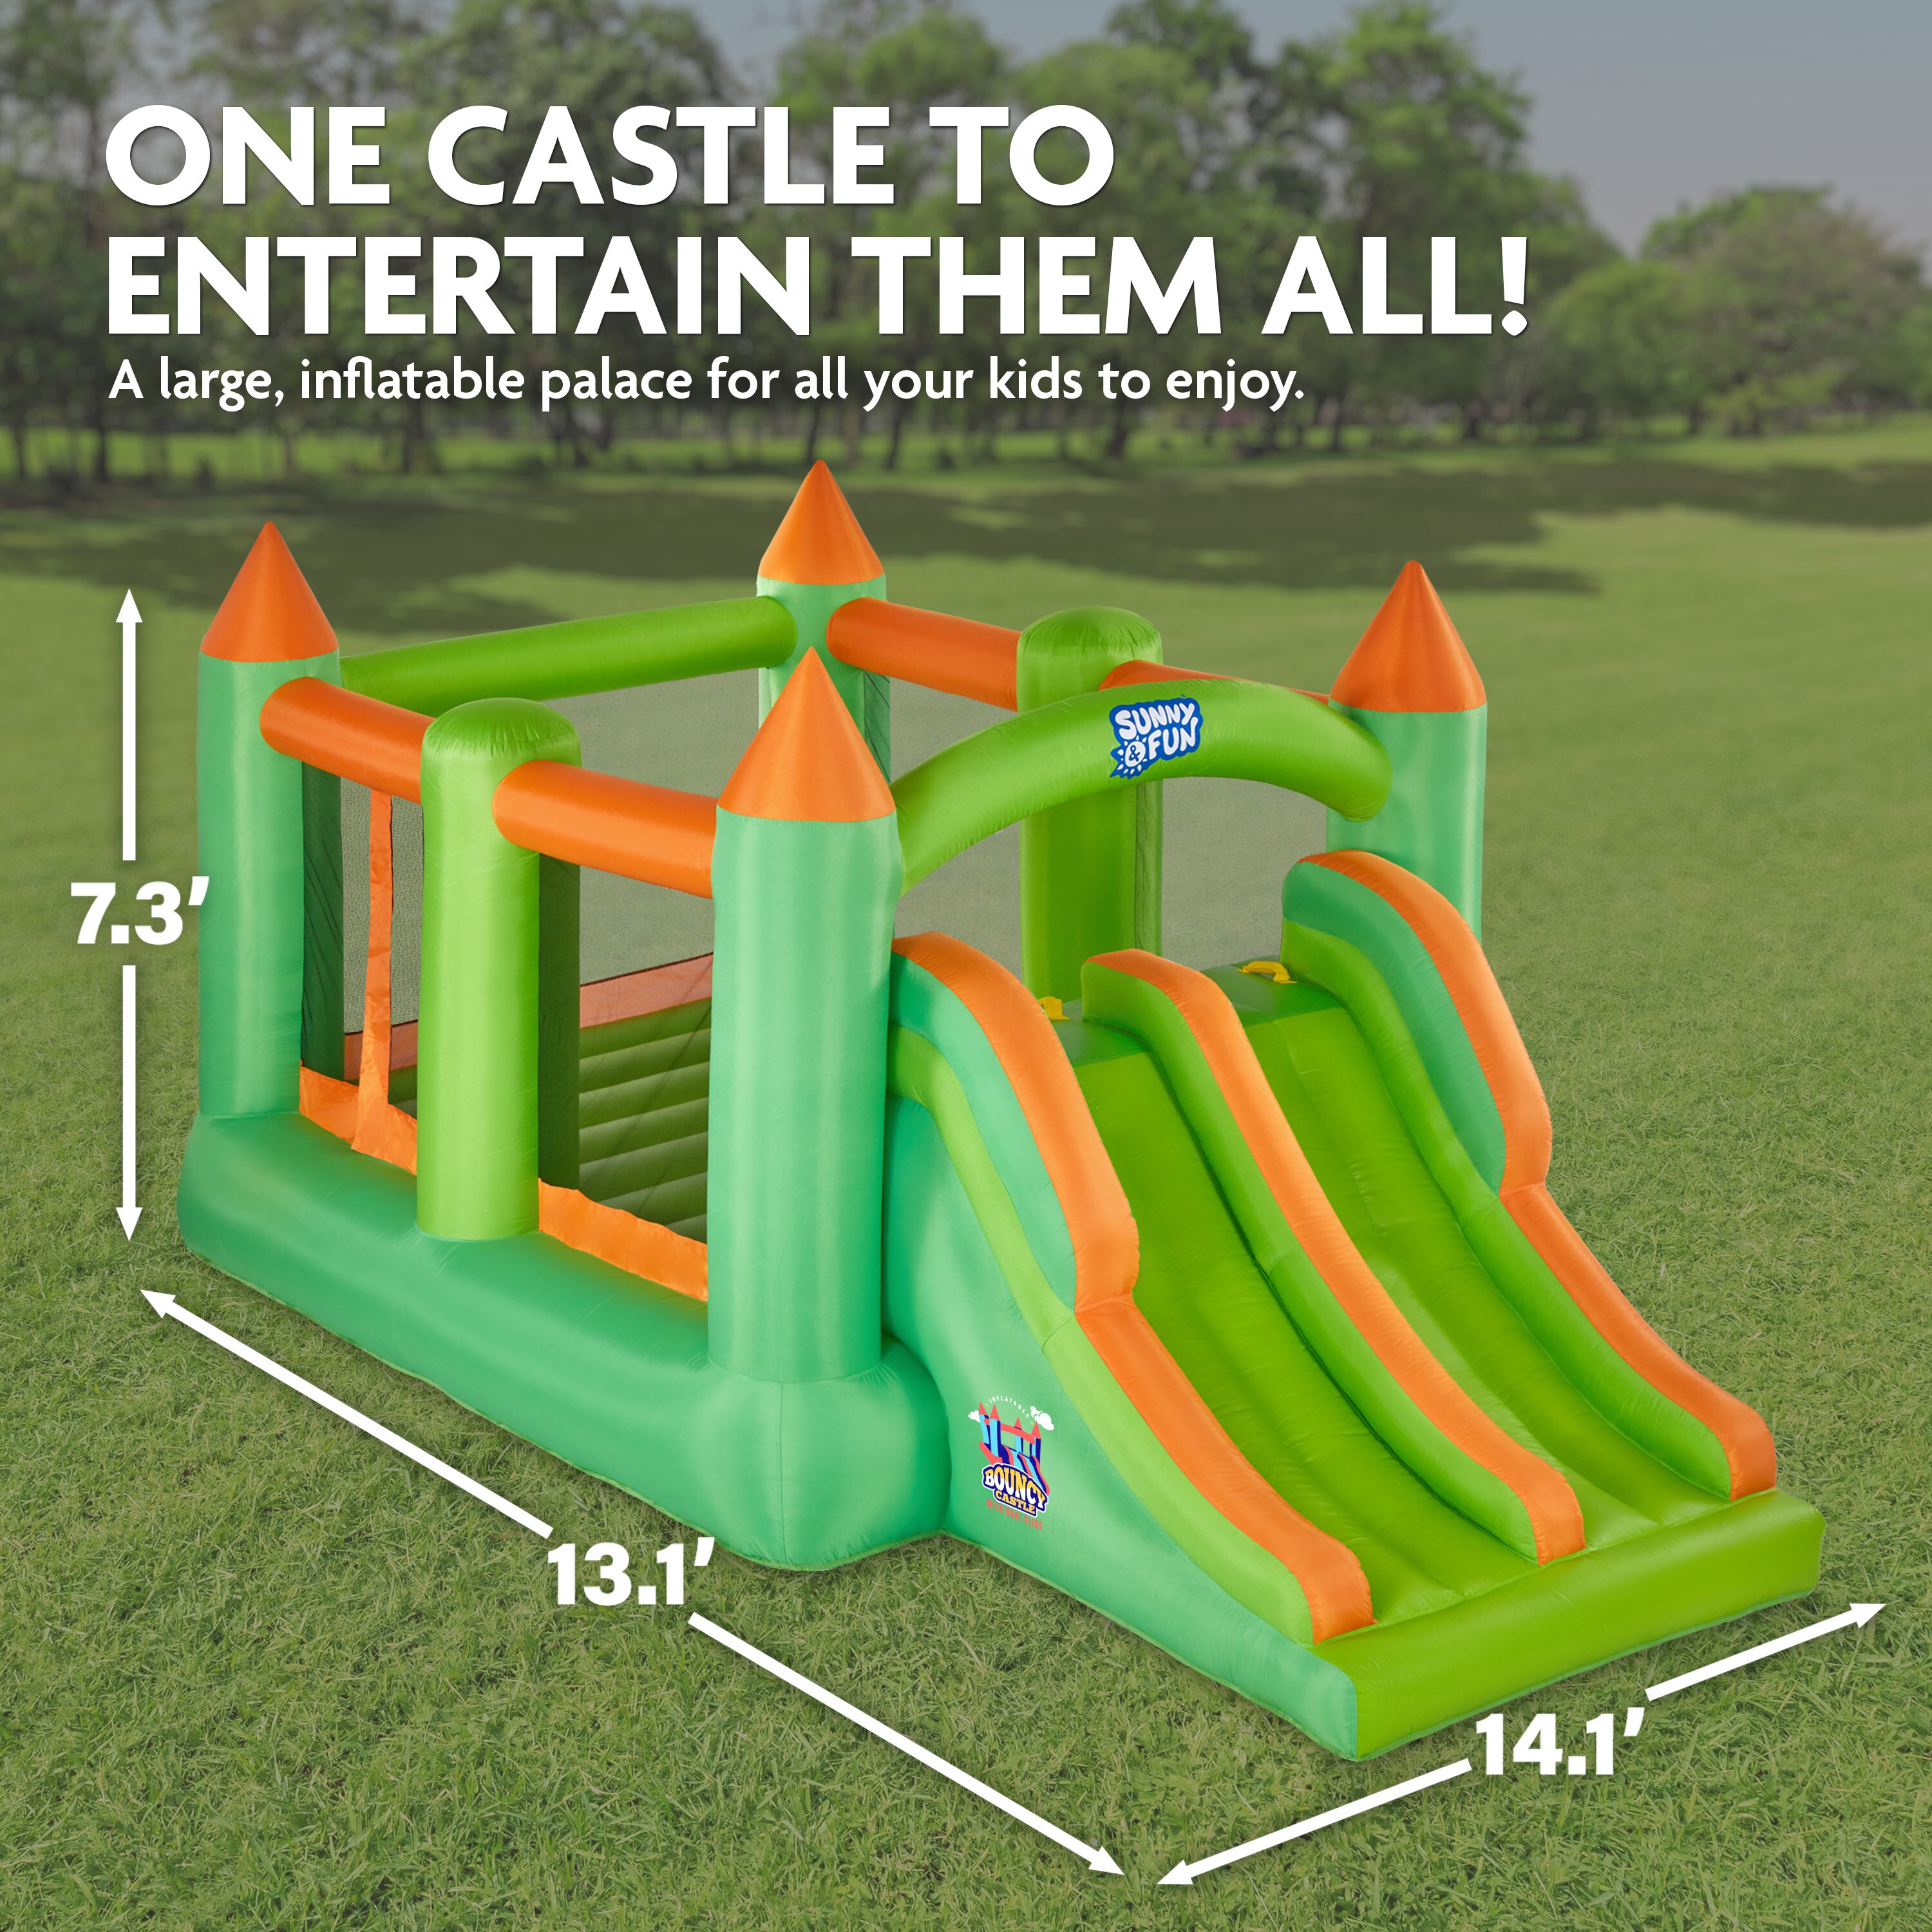 Sunny & Fun Inflatable Bouncy Castle with Dual Slide – Heavy-Duty for Outdoor Fun Climbing Wall Slides Bounce House – Easy to Set Up & Inflate with Included Air Pump & Carrying Case 